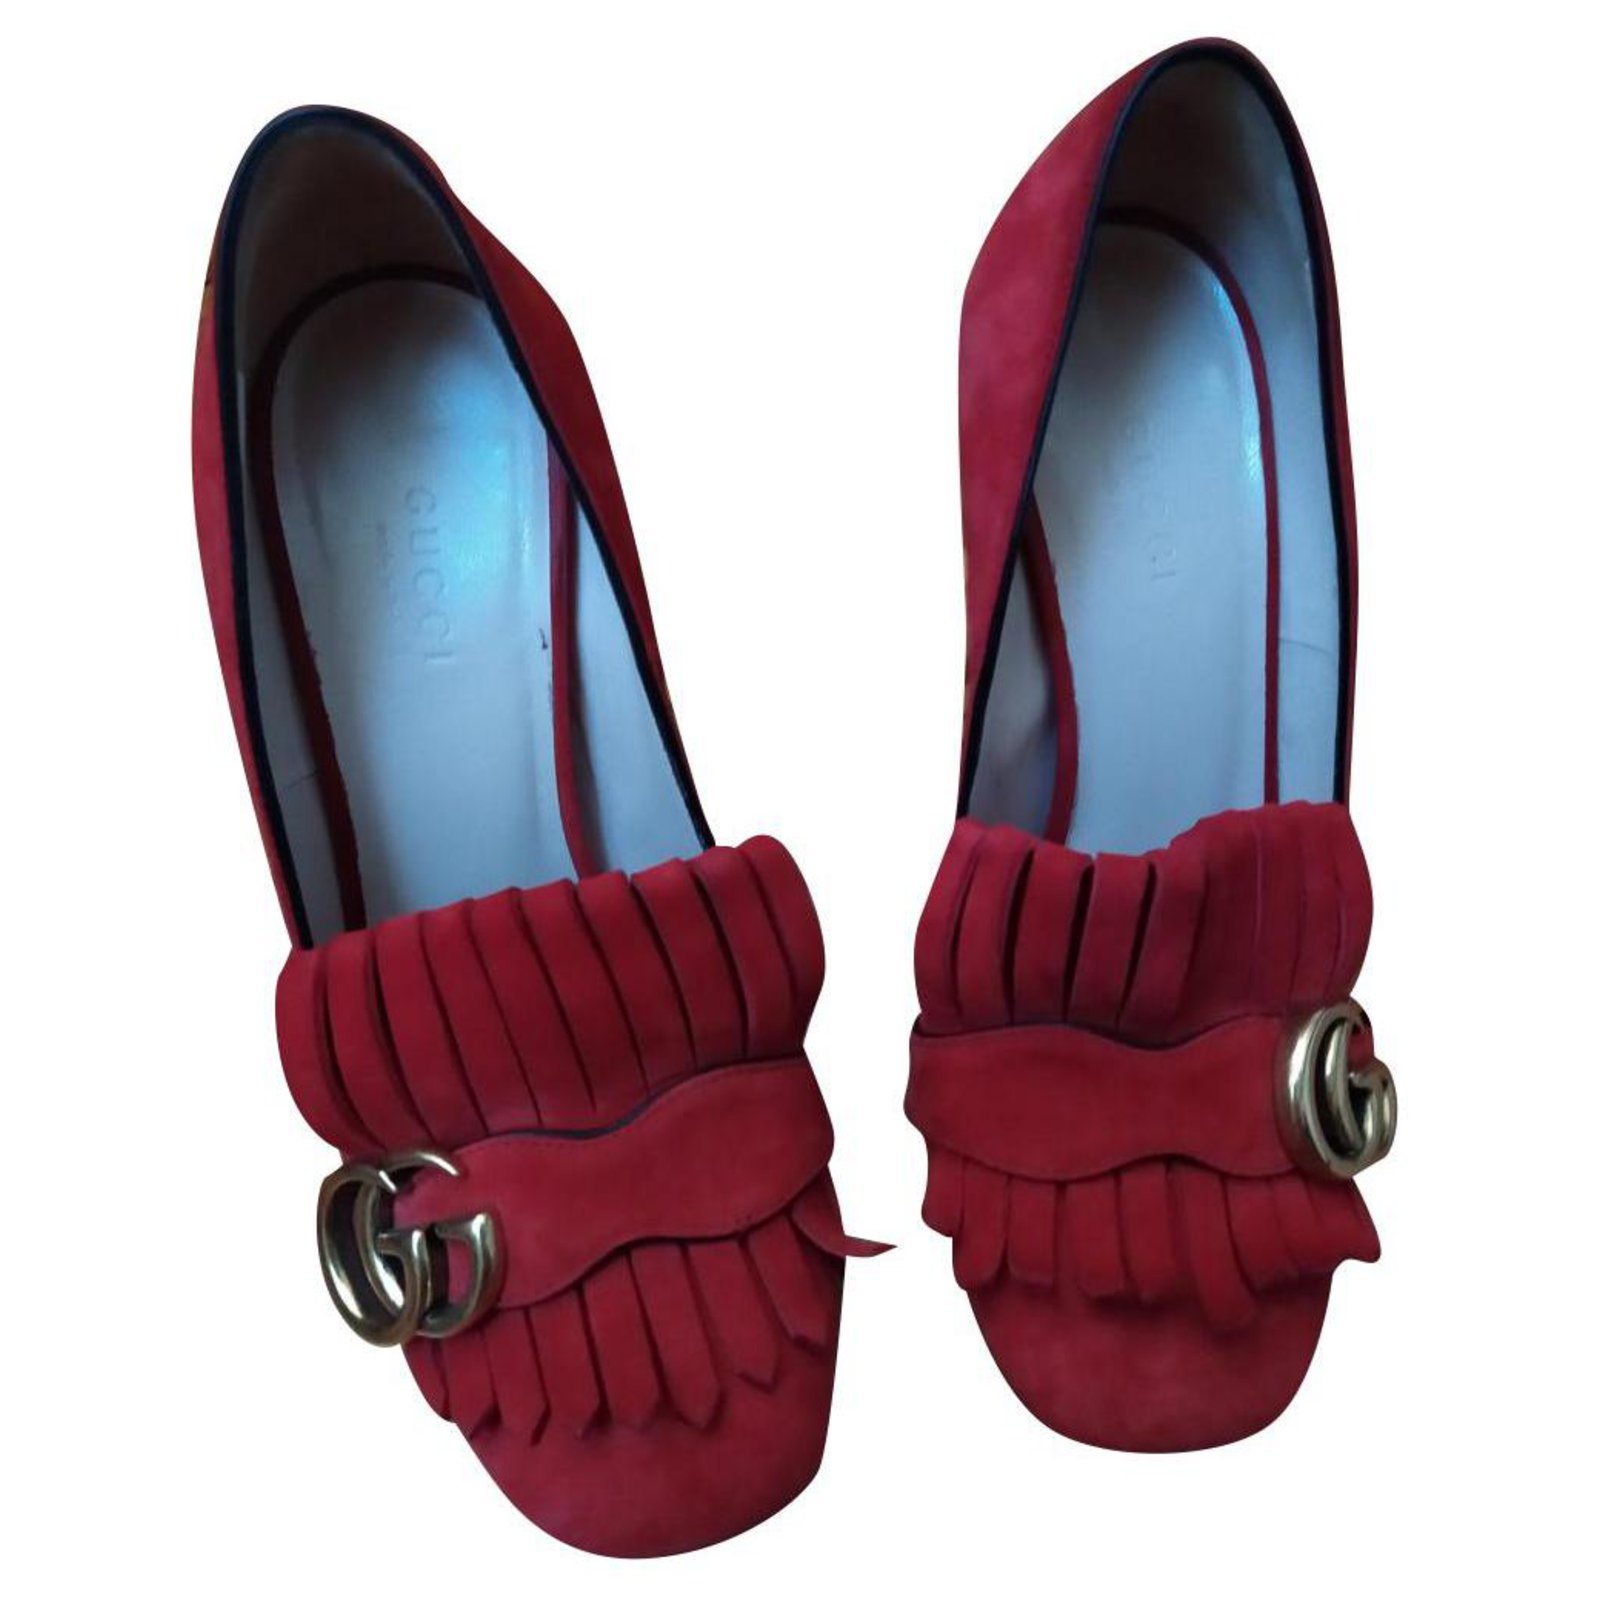 gucci marmont red shoes